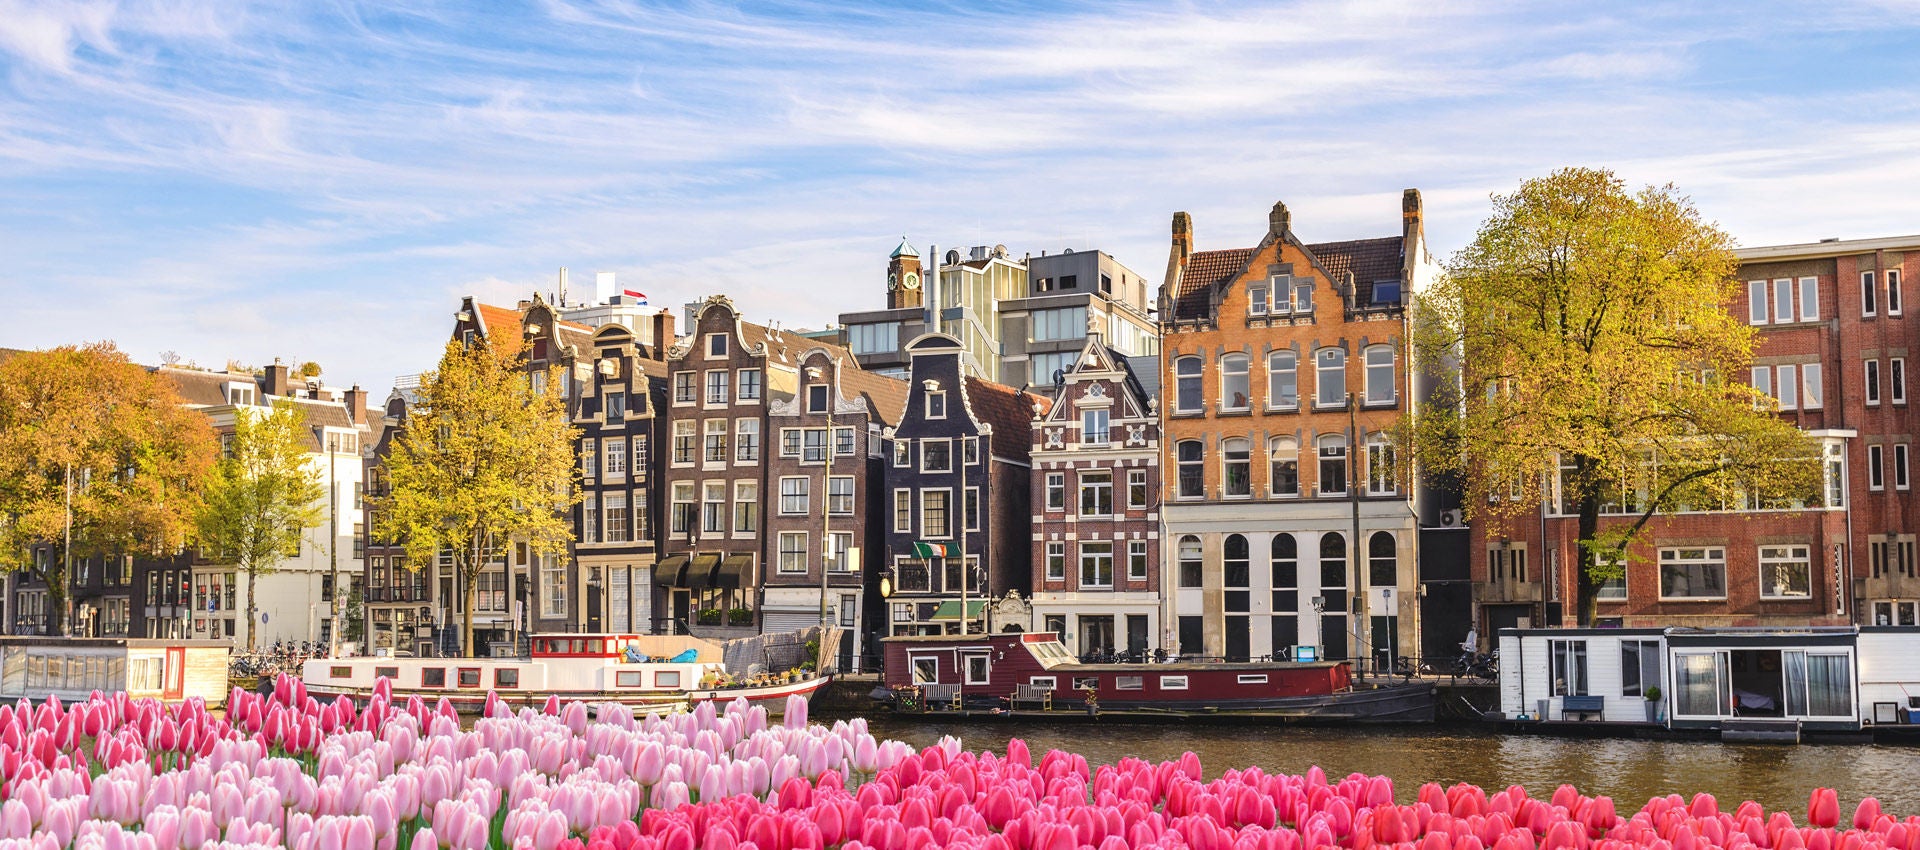 Dutch houses stand above one of the canals of Amsterdam while spring tulips appear in the foreground.